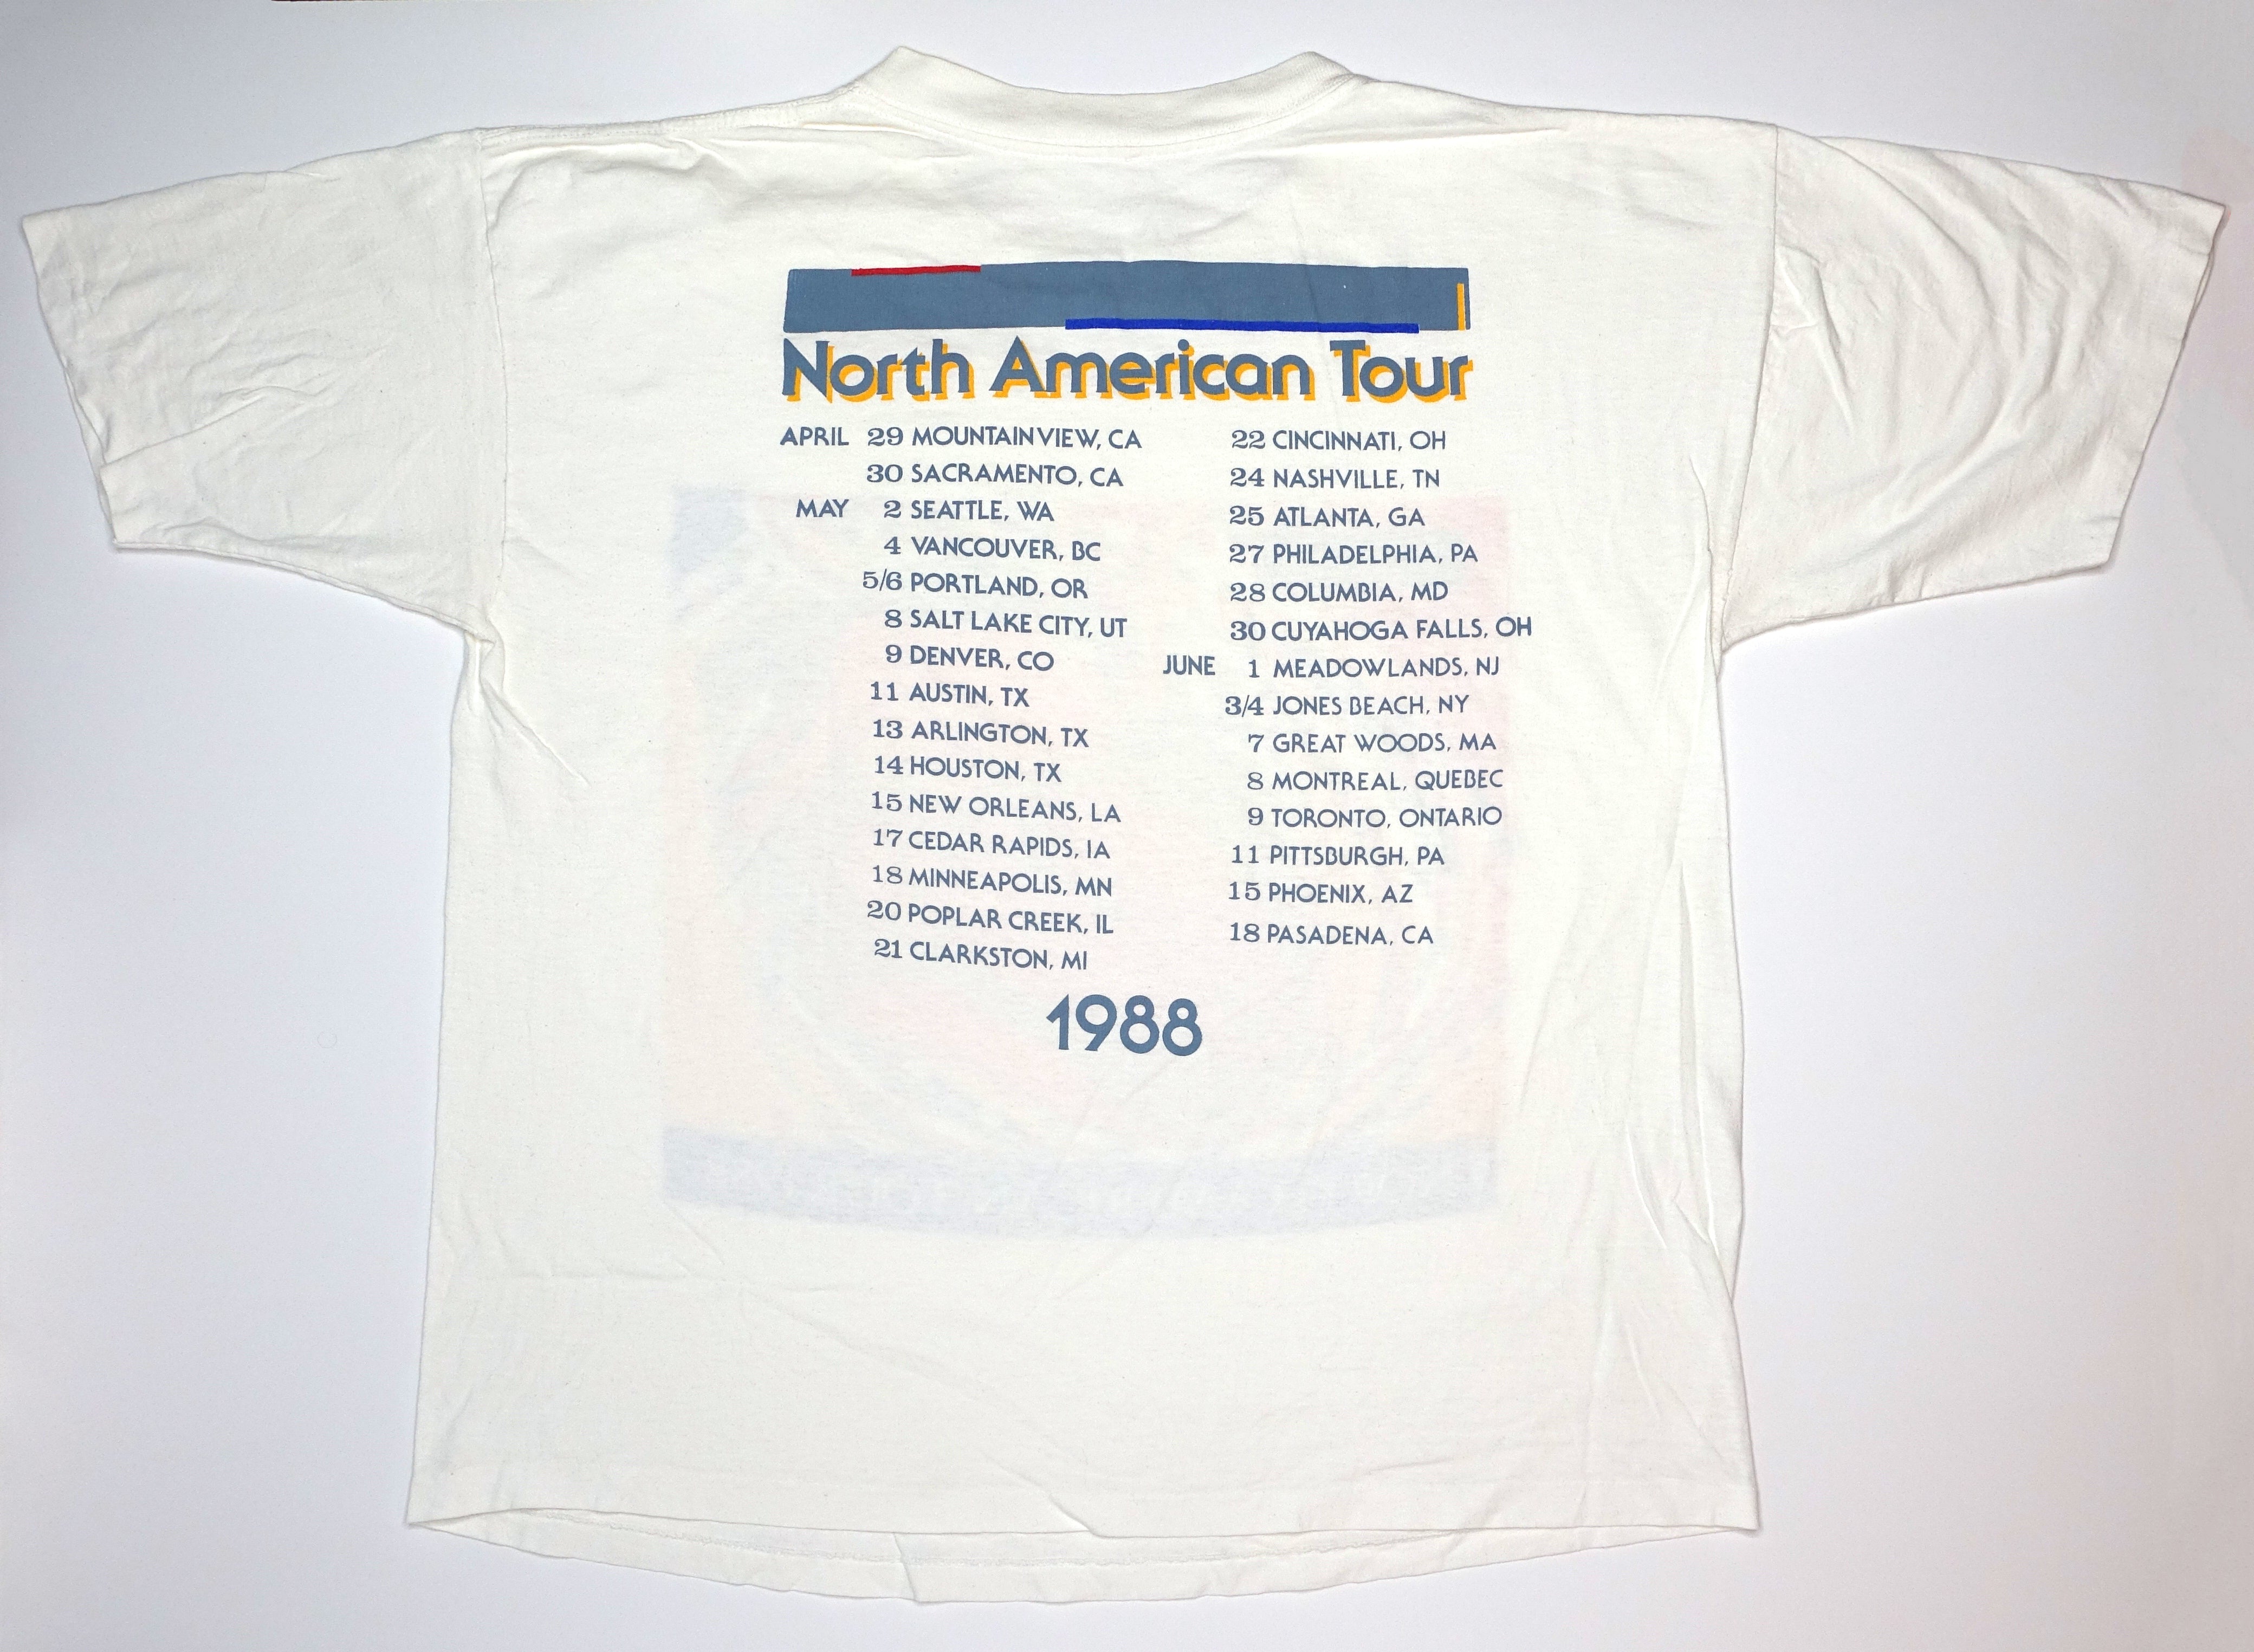 Orchestral Manoeuvres In The Dark (OMD) - Tesla Girls 1988 North American Tour Shirt Size XL